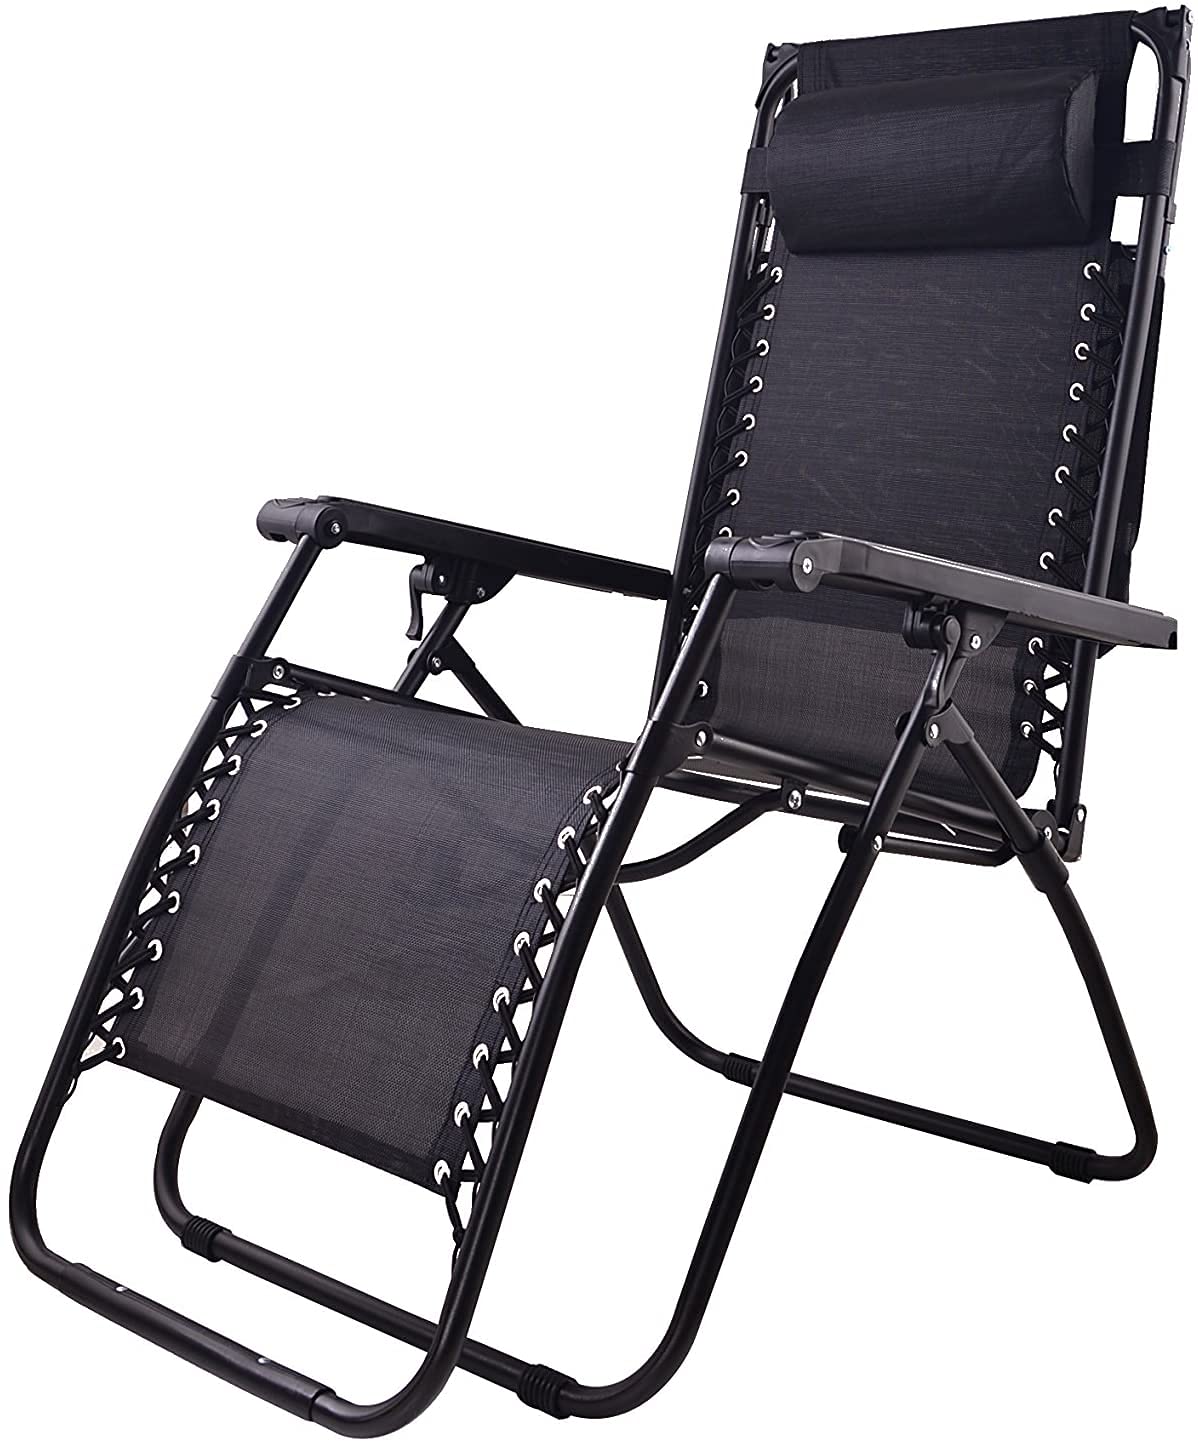 BTEXPERT CC5044B Zero Gravity Chair Case Lounge Outdoor Patio Beach Yard Garden with Utility Tray Cup Holder (One Piece, Black with Canopy) One Piece